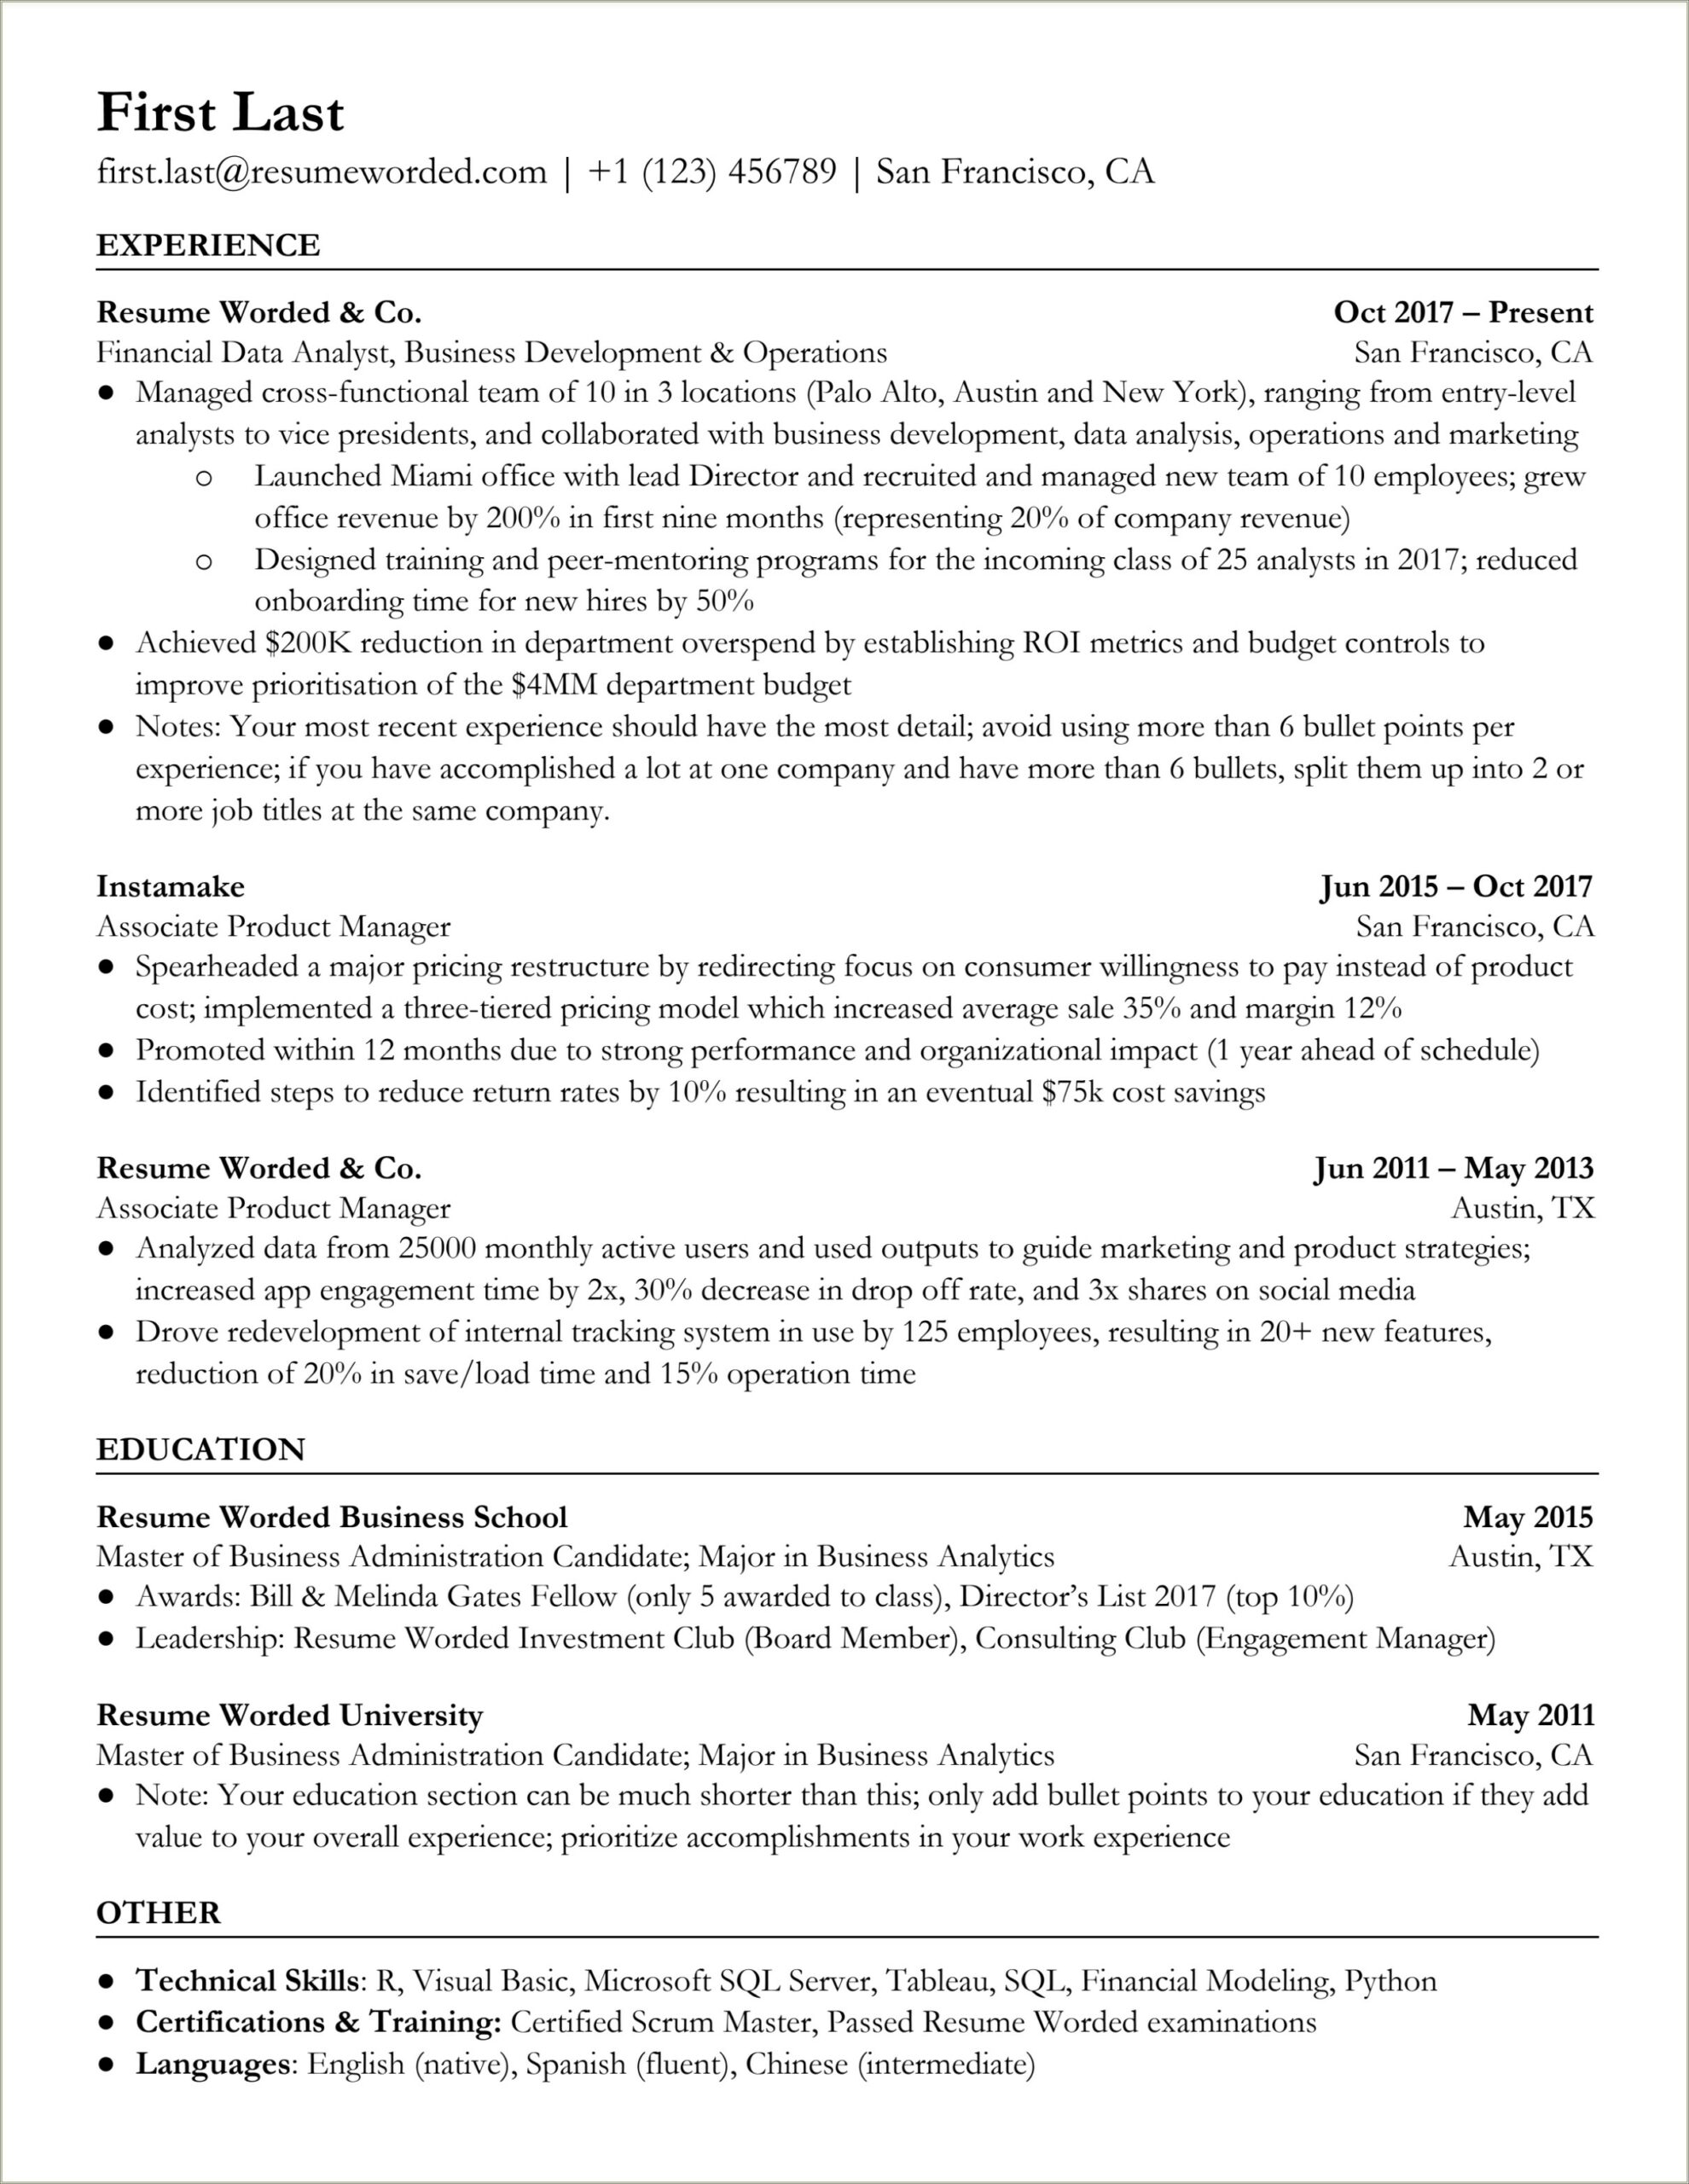 Resumes And Ats Years Of Experience